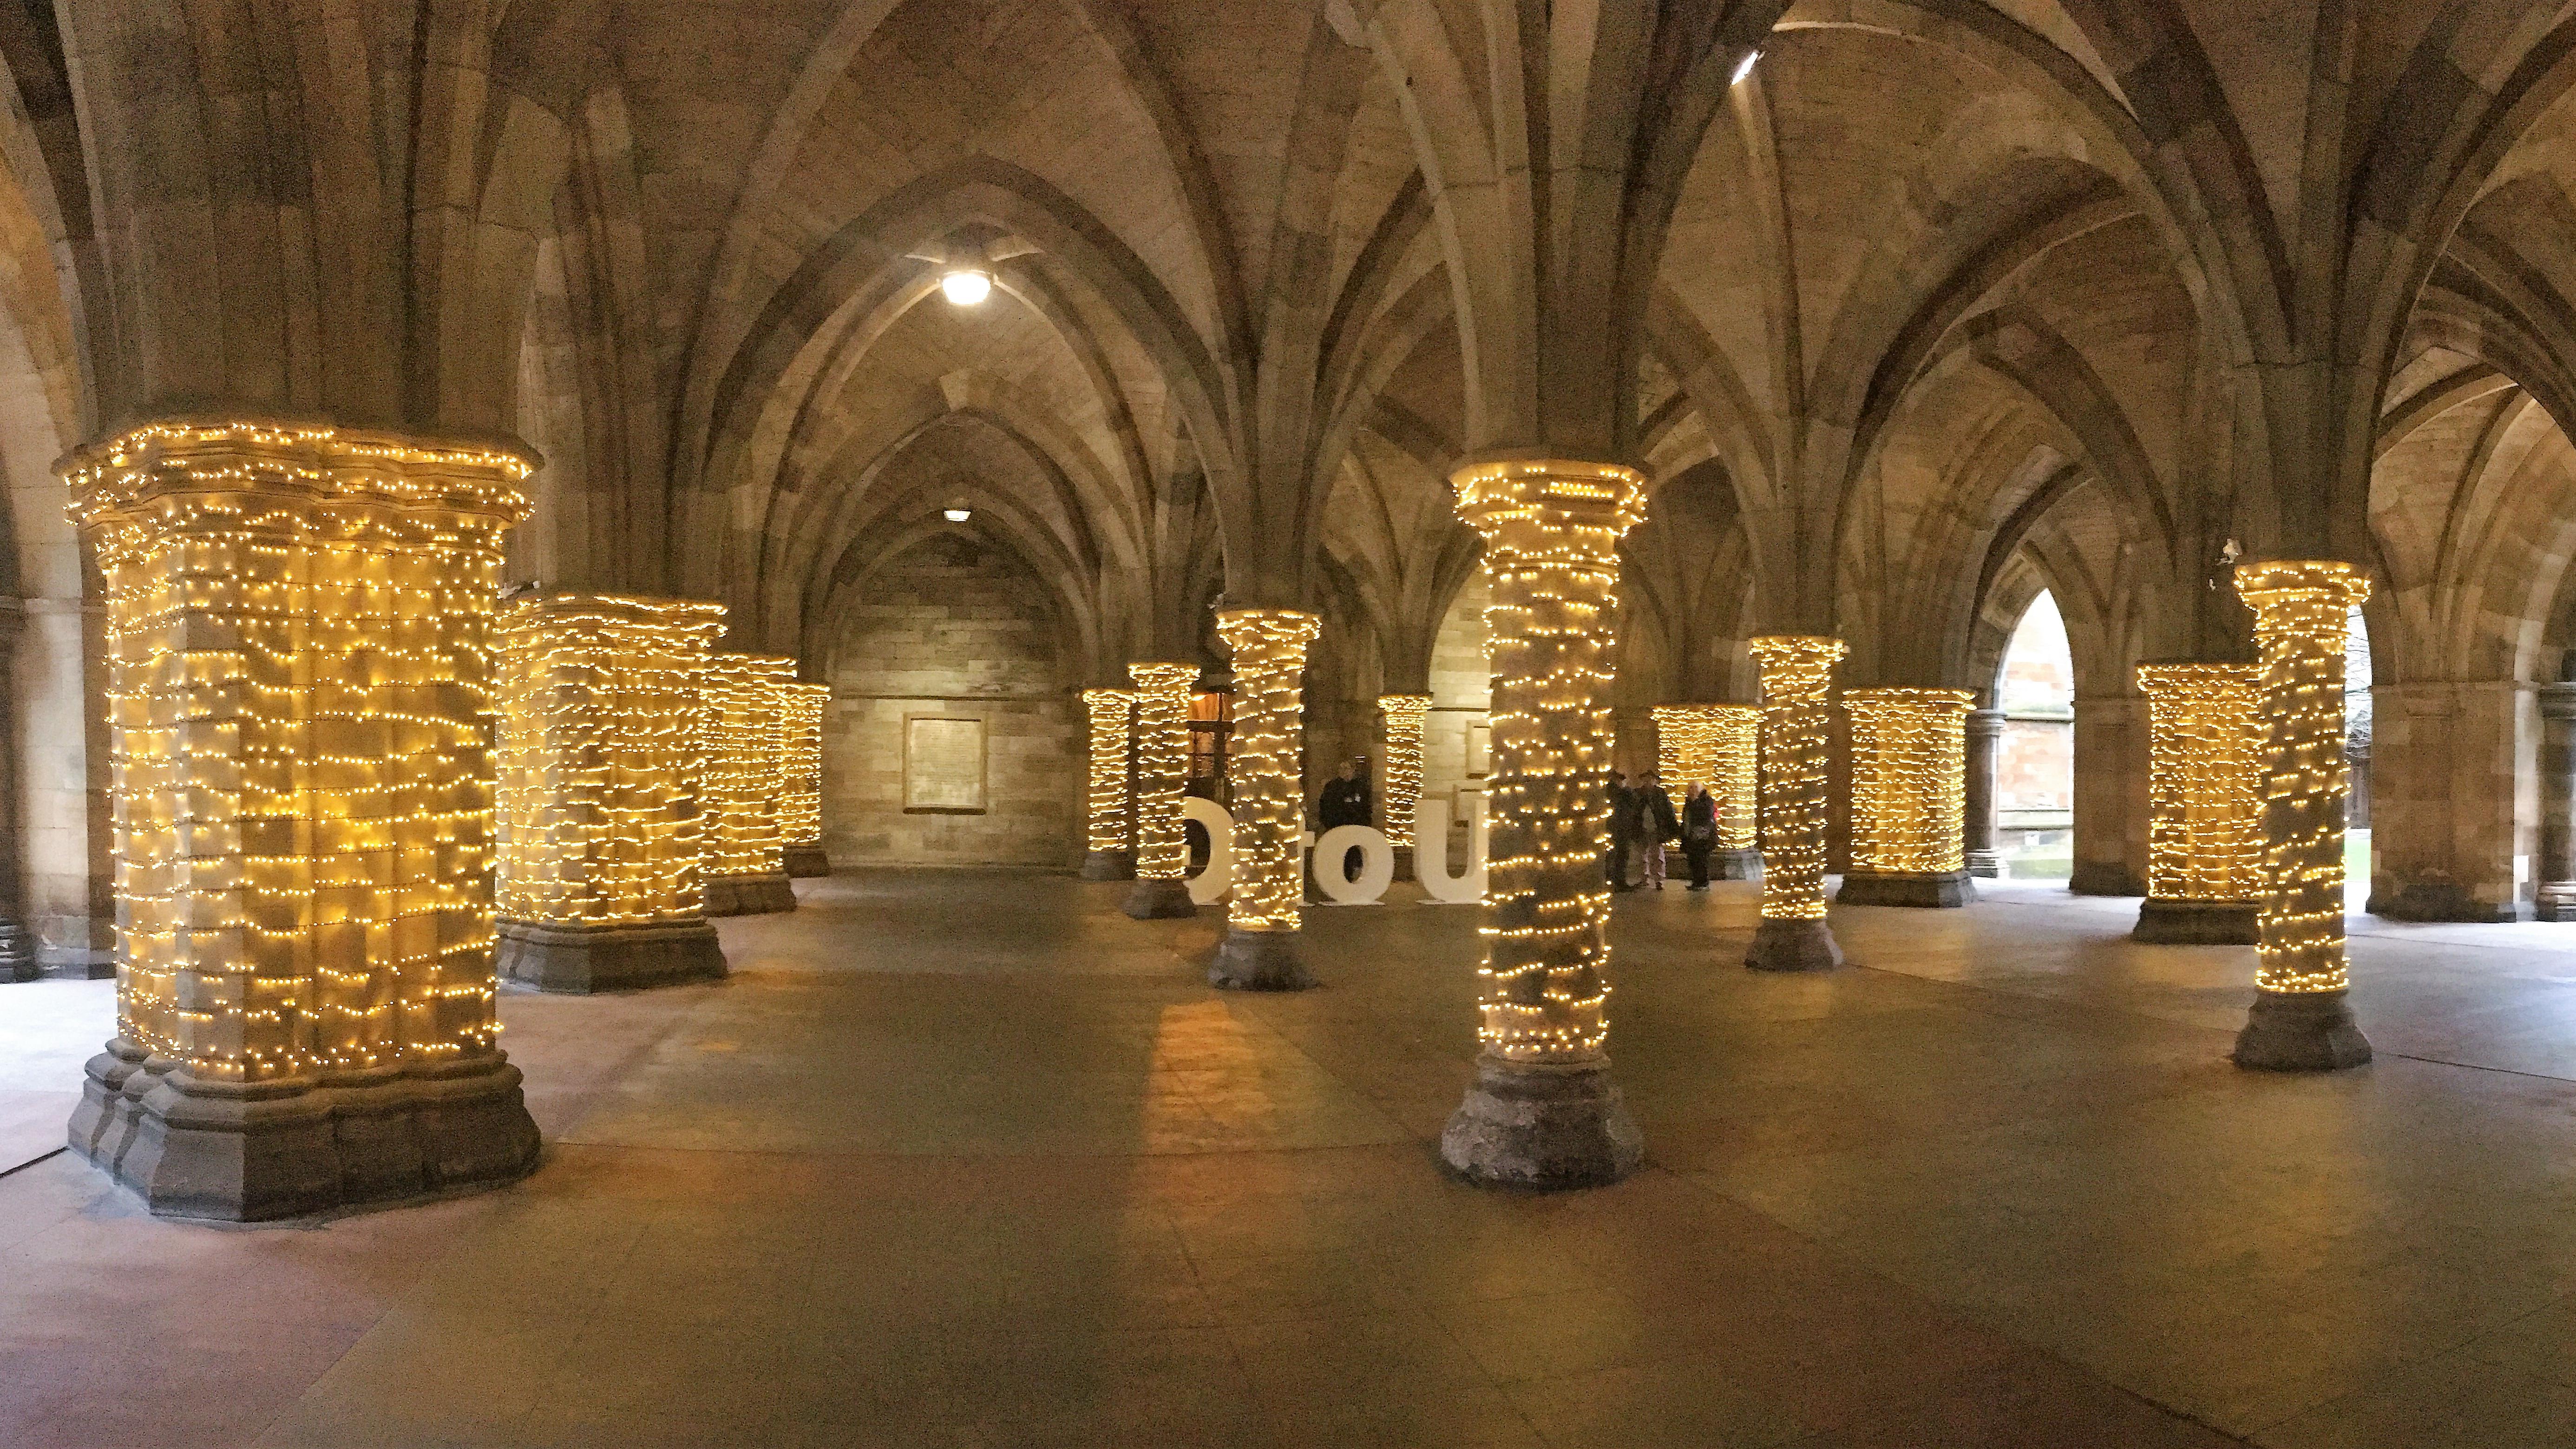 The Cloisters - University of Glasgow